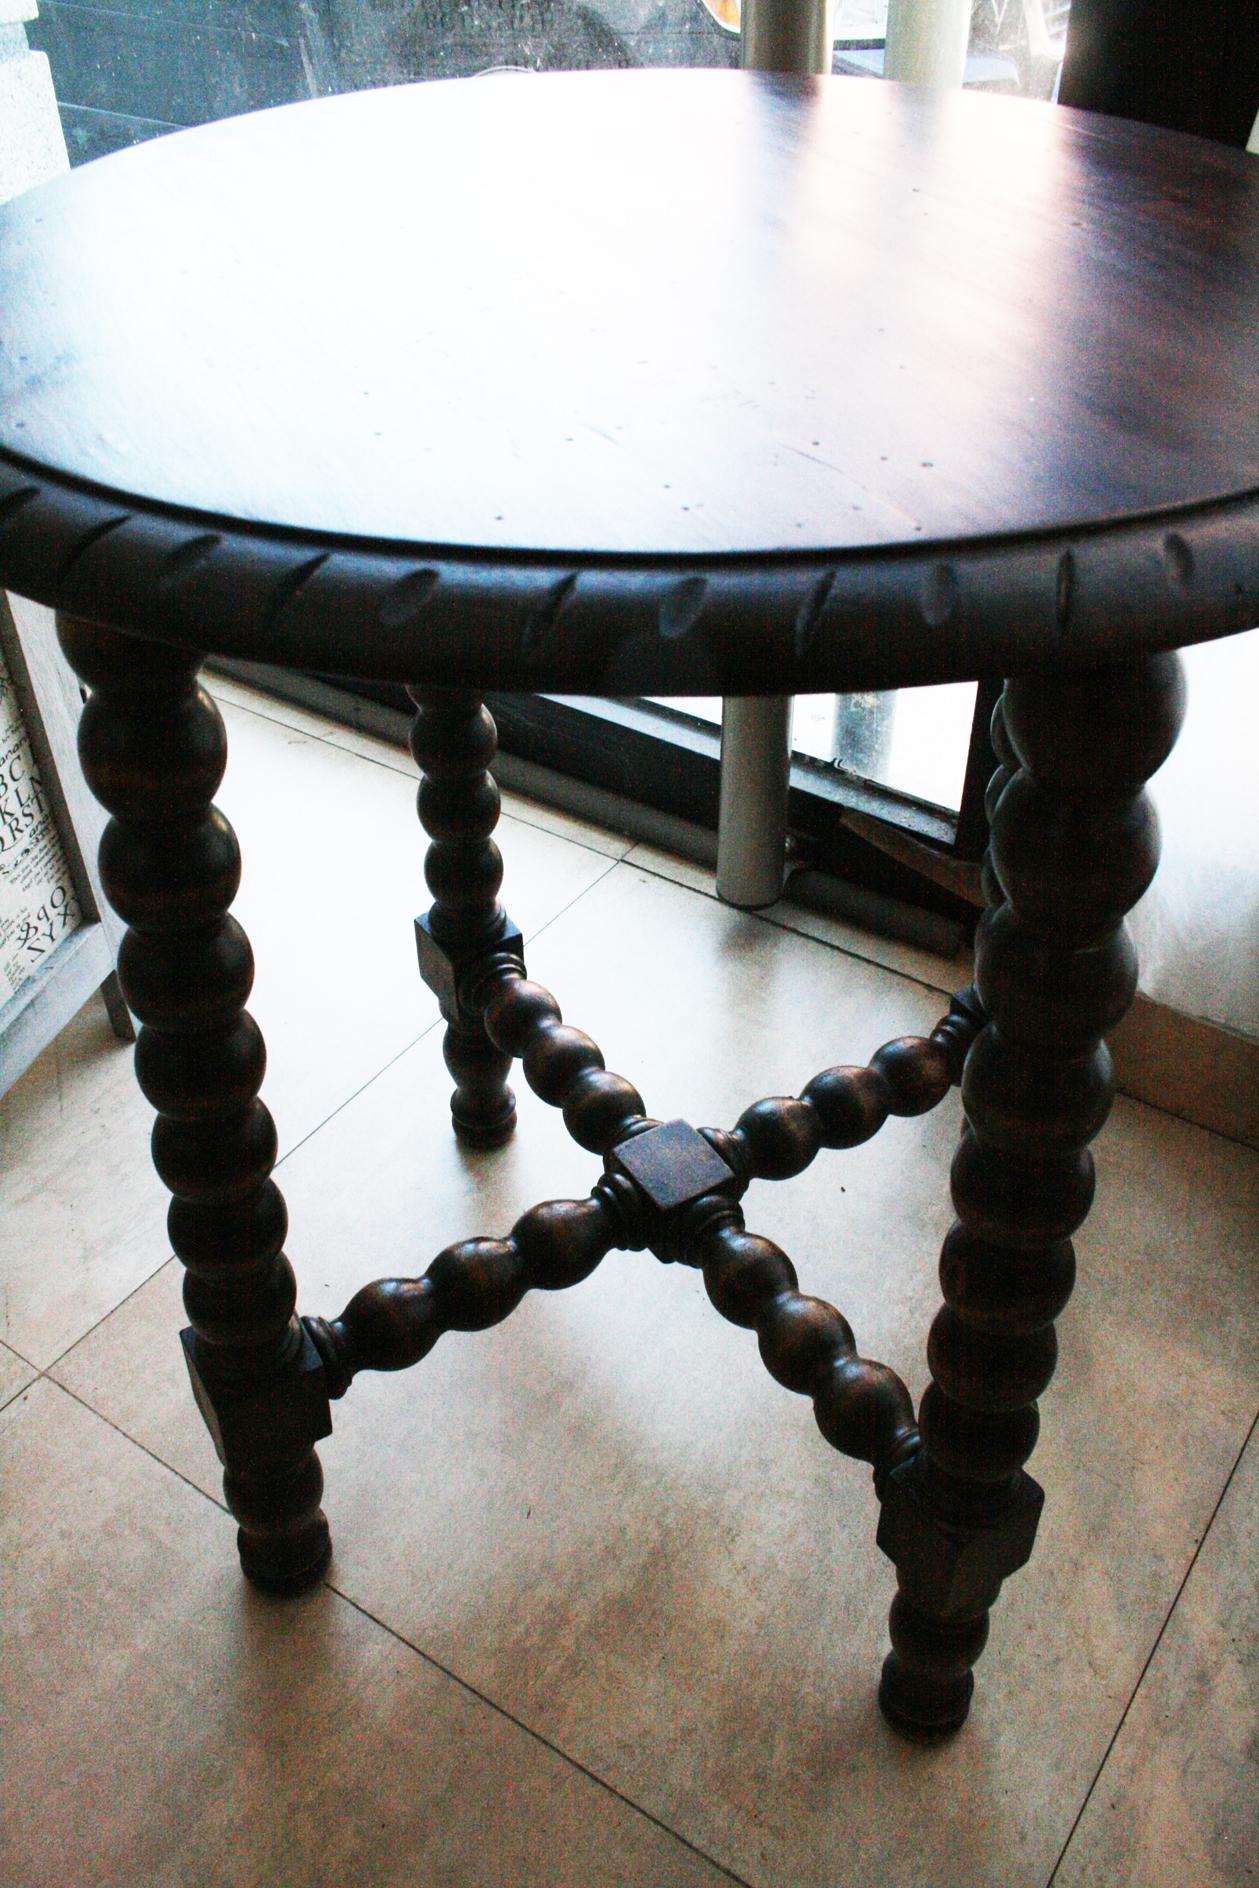 Antique Round Side Table from the 19th Century Wood with Turned Legs 8